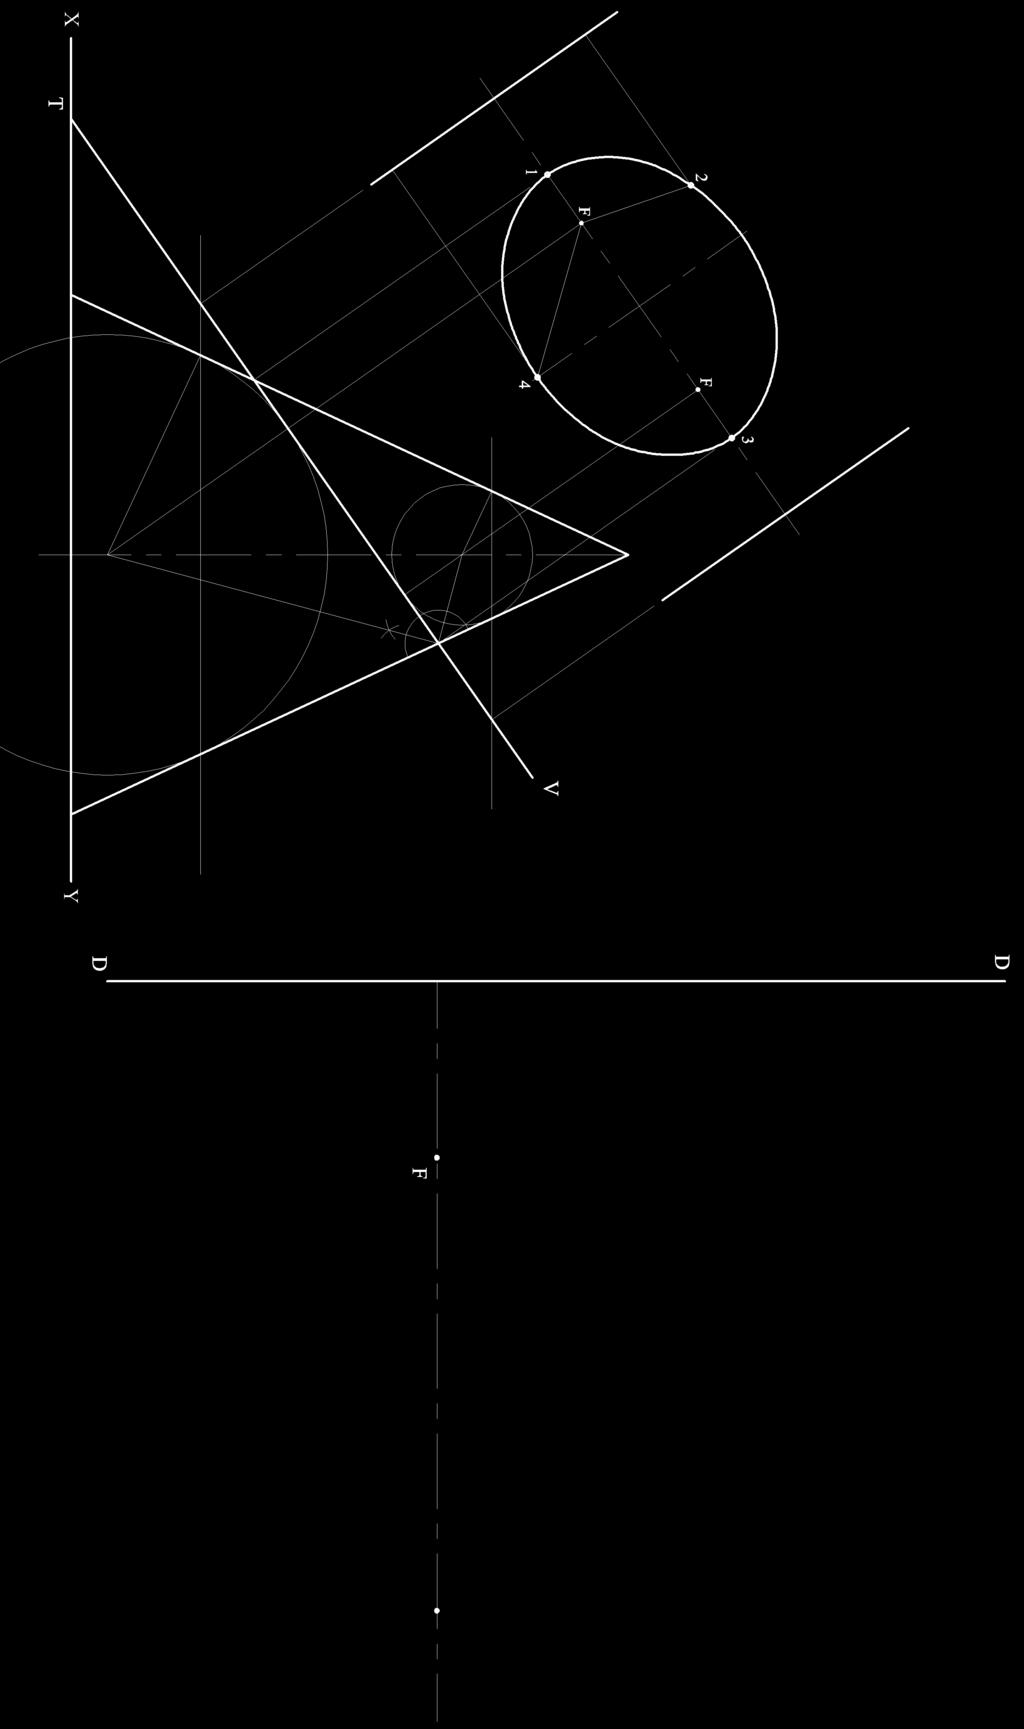 below shows the directrix, axis and focal point of an ellipse. The eccentricity of the curve is 3/4.